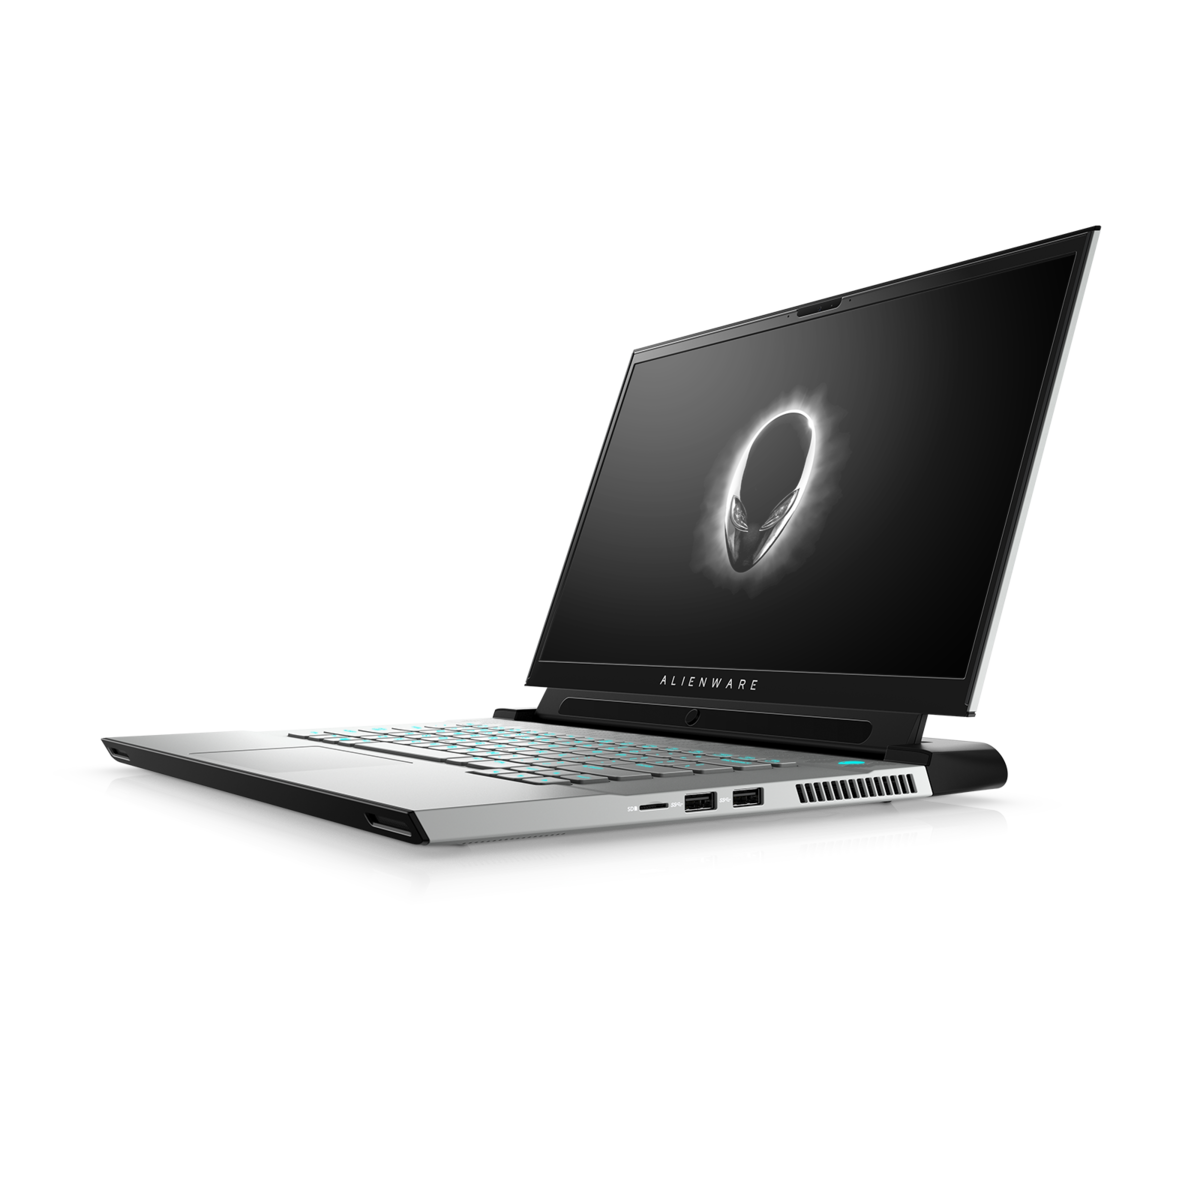 Alienware m15 R4 announced with OLED display option, Comet Lake-H, and